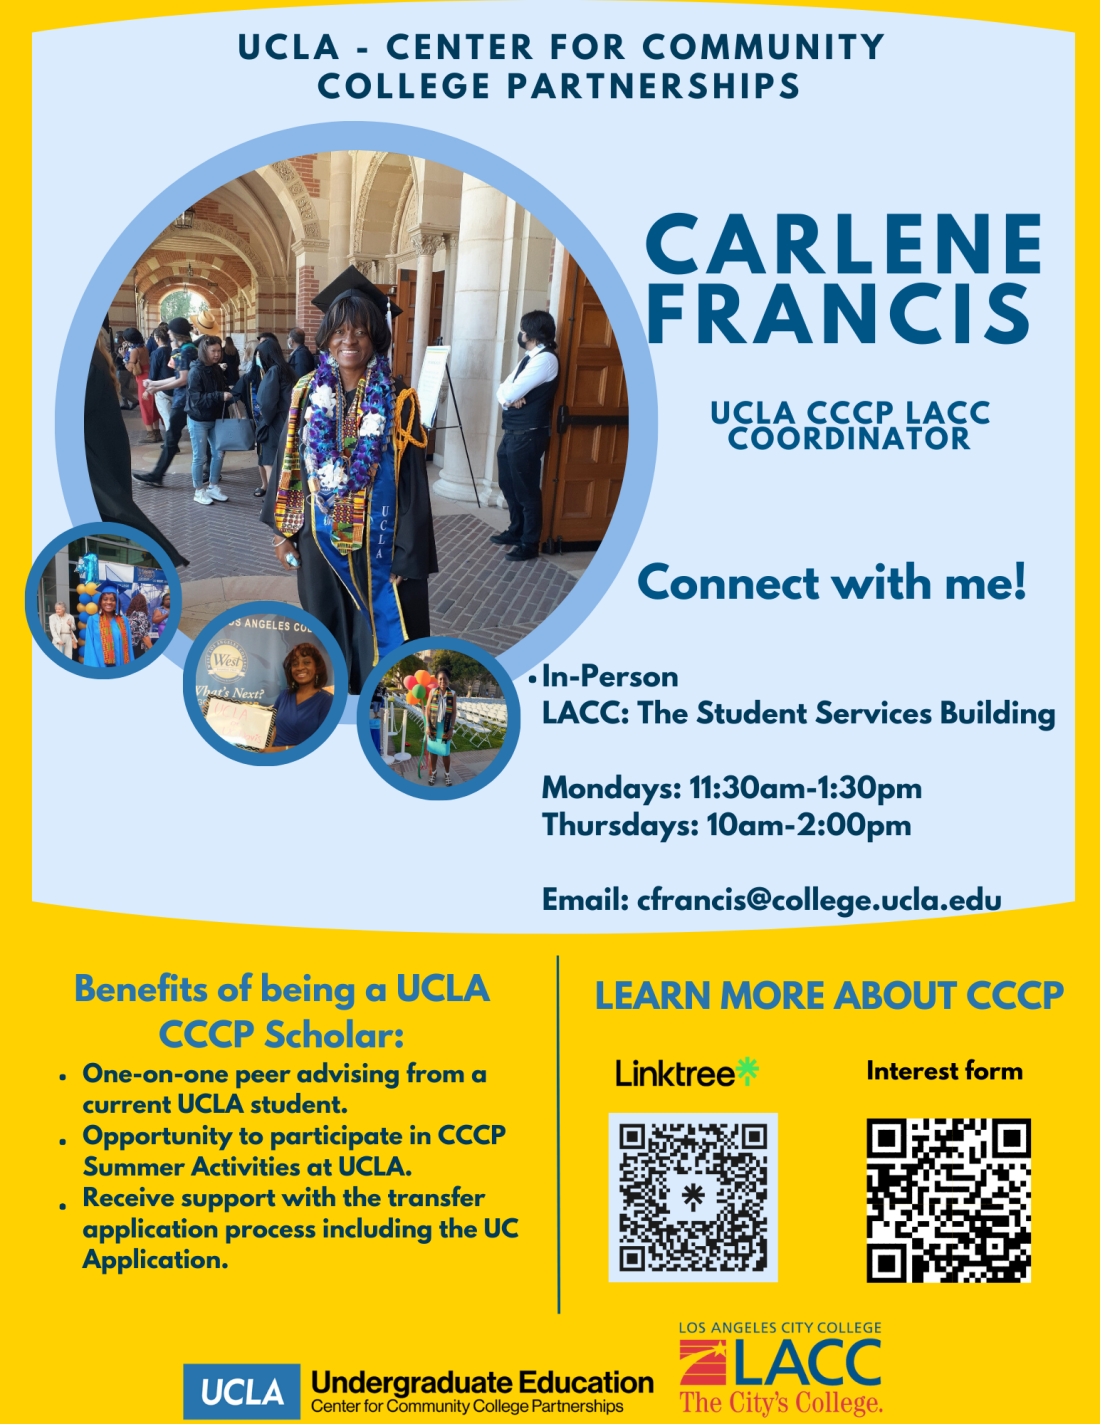 Flyer of UCLA CCCP Rep. Carlene Francis who is here Mondays 11:30am-1:30pm and Thursdays 10:00am-2:00pm